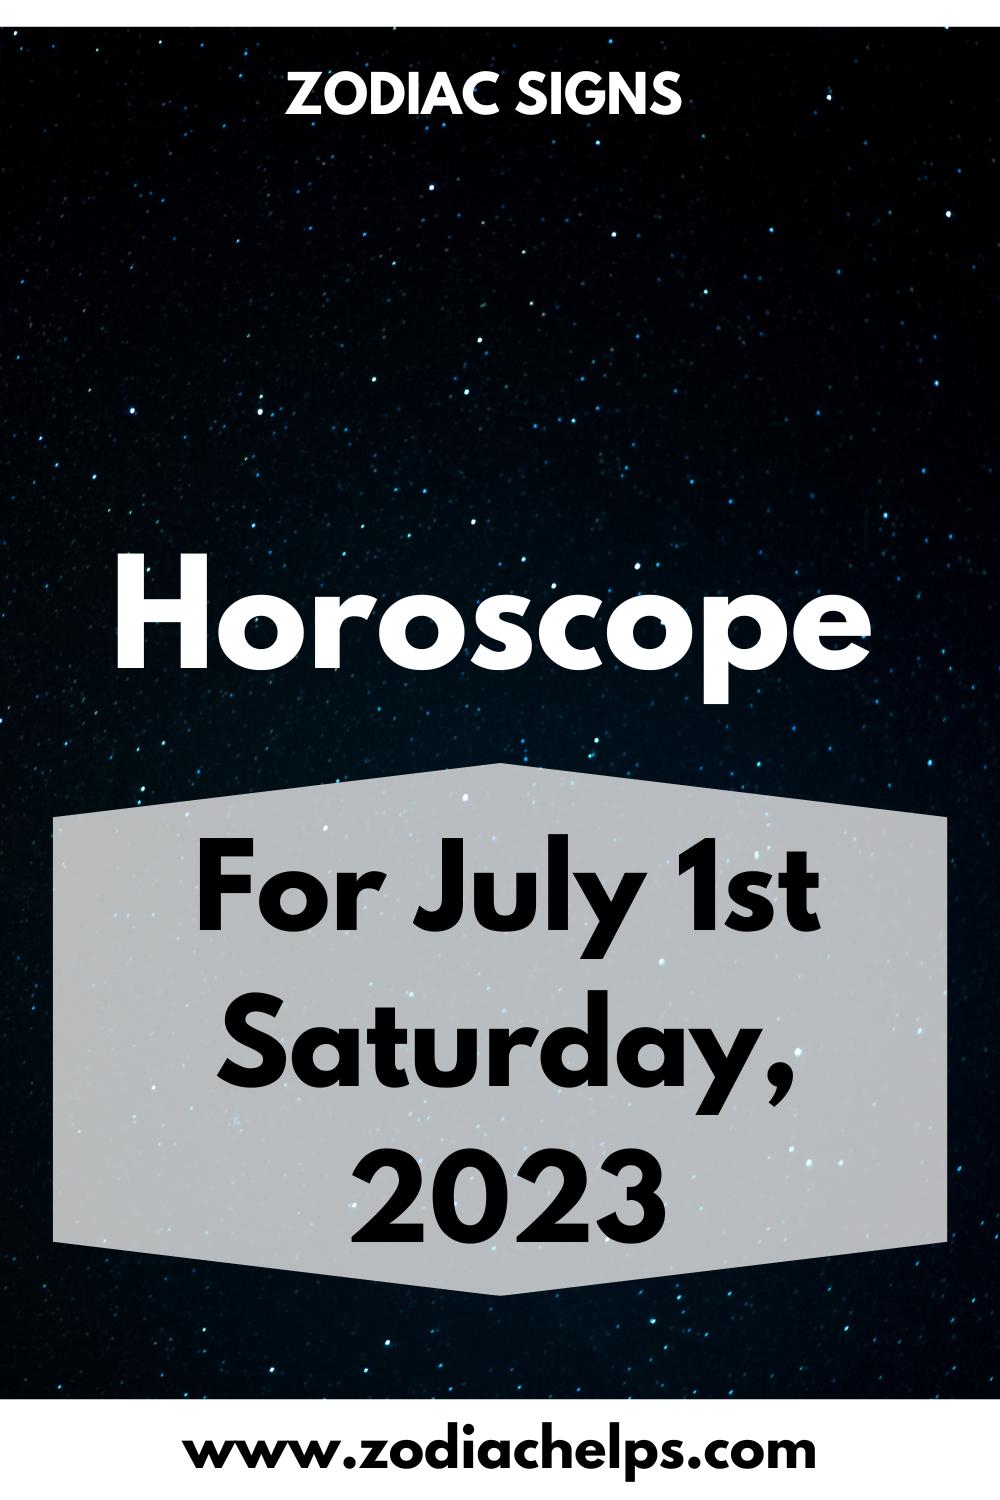 Horoscope for July 1st Saturday, 2023